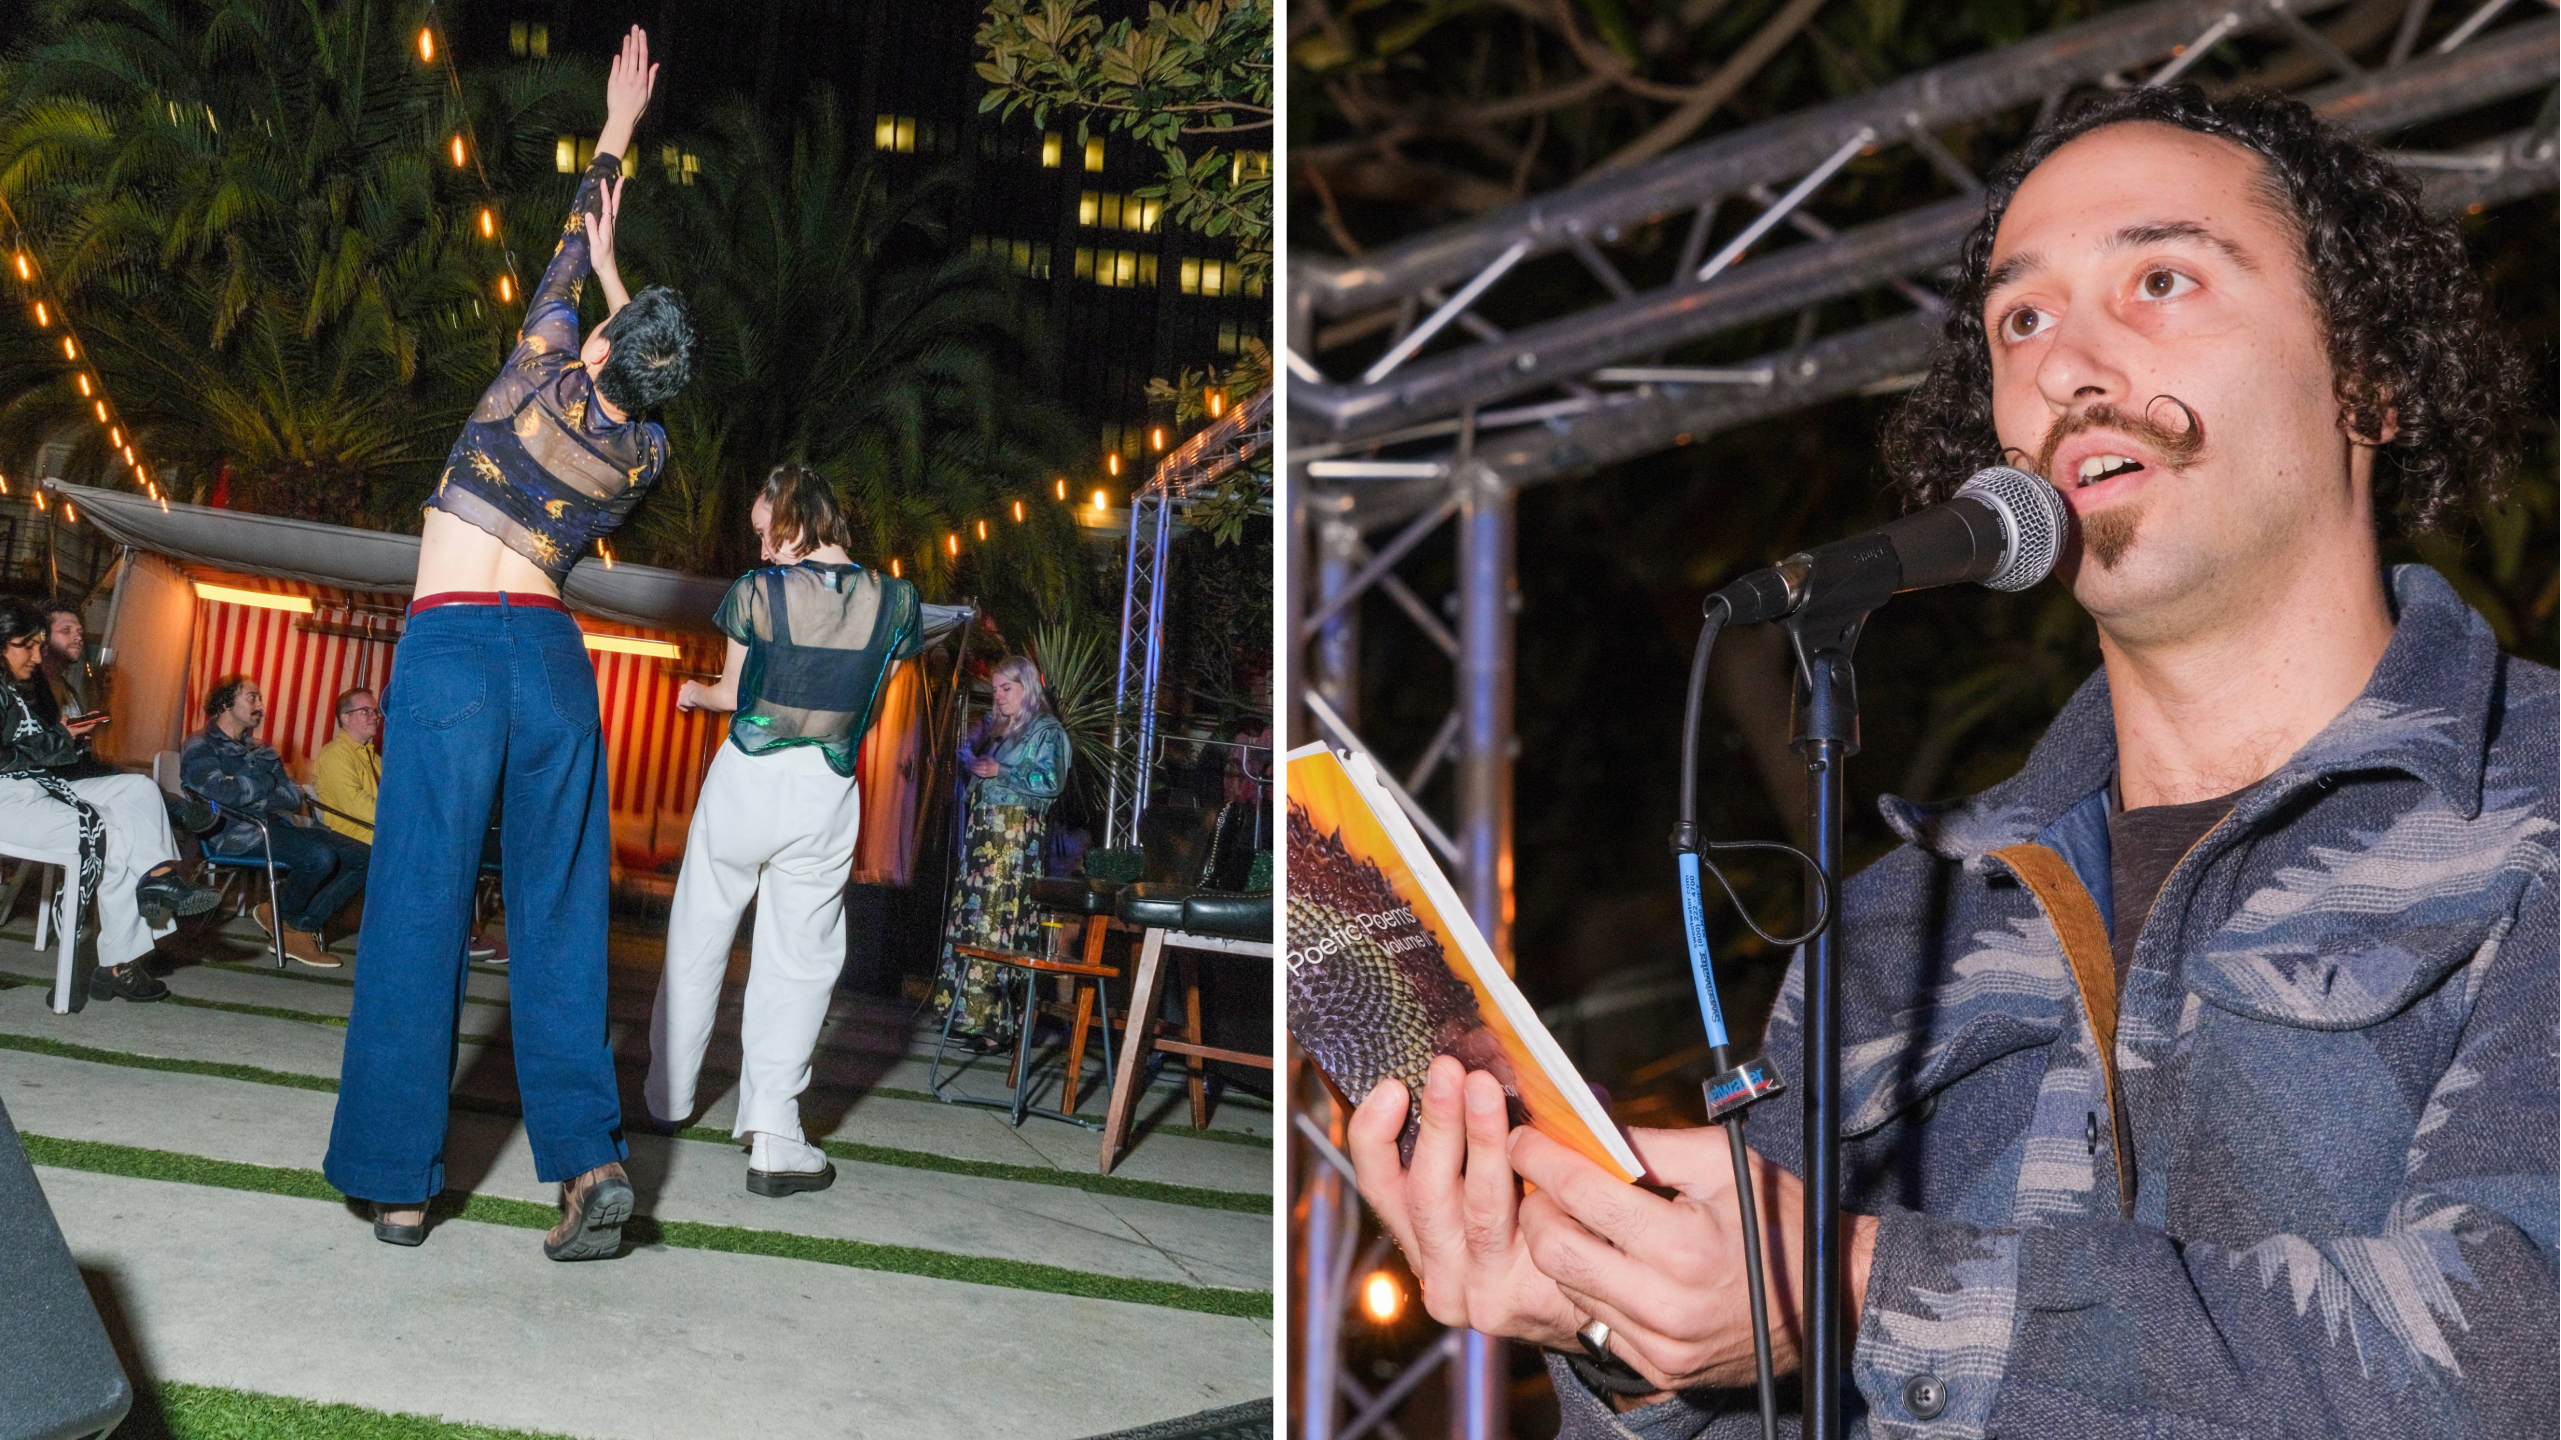 Split image: left shows a person reaching up mid-dance outdoors at night; right shows a man holding a book, speaking into a microphone.